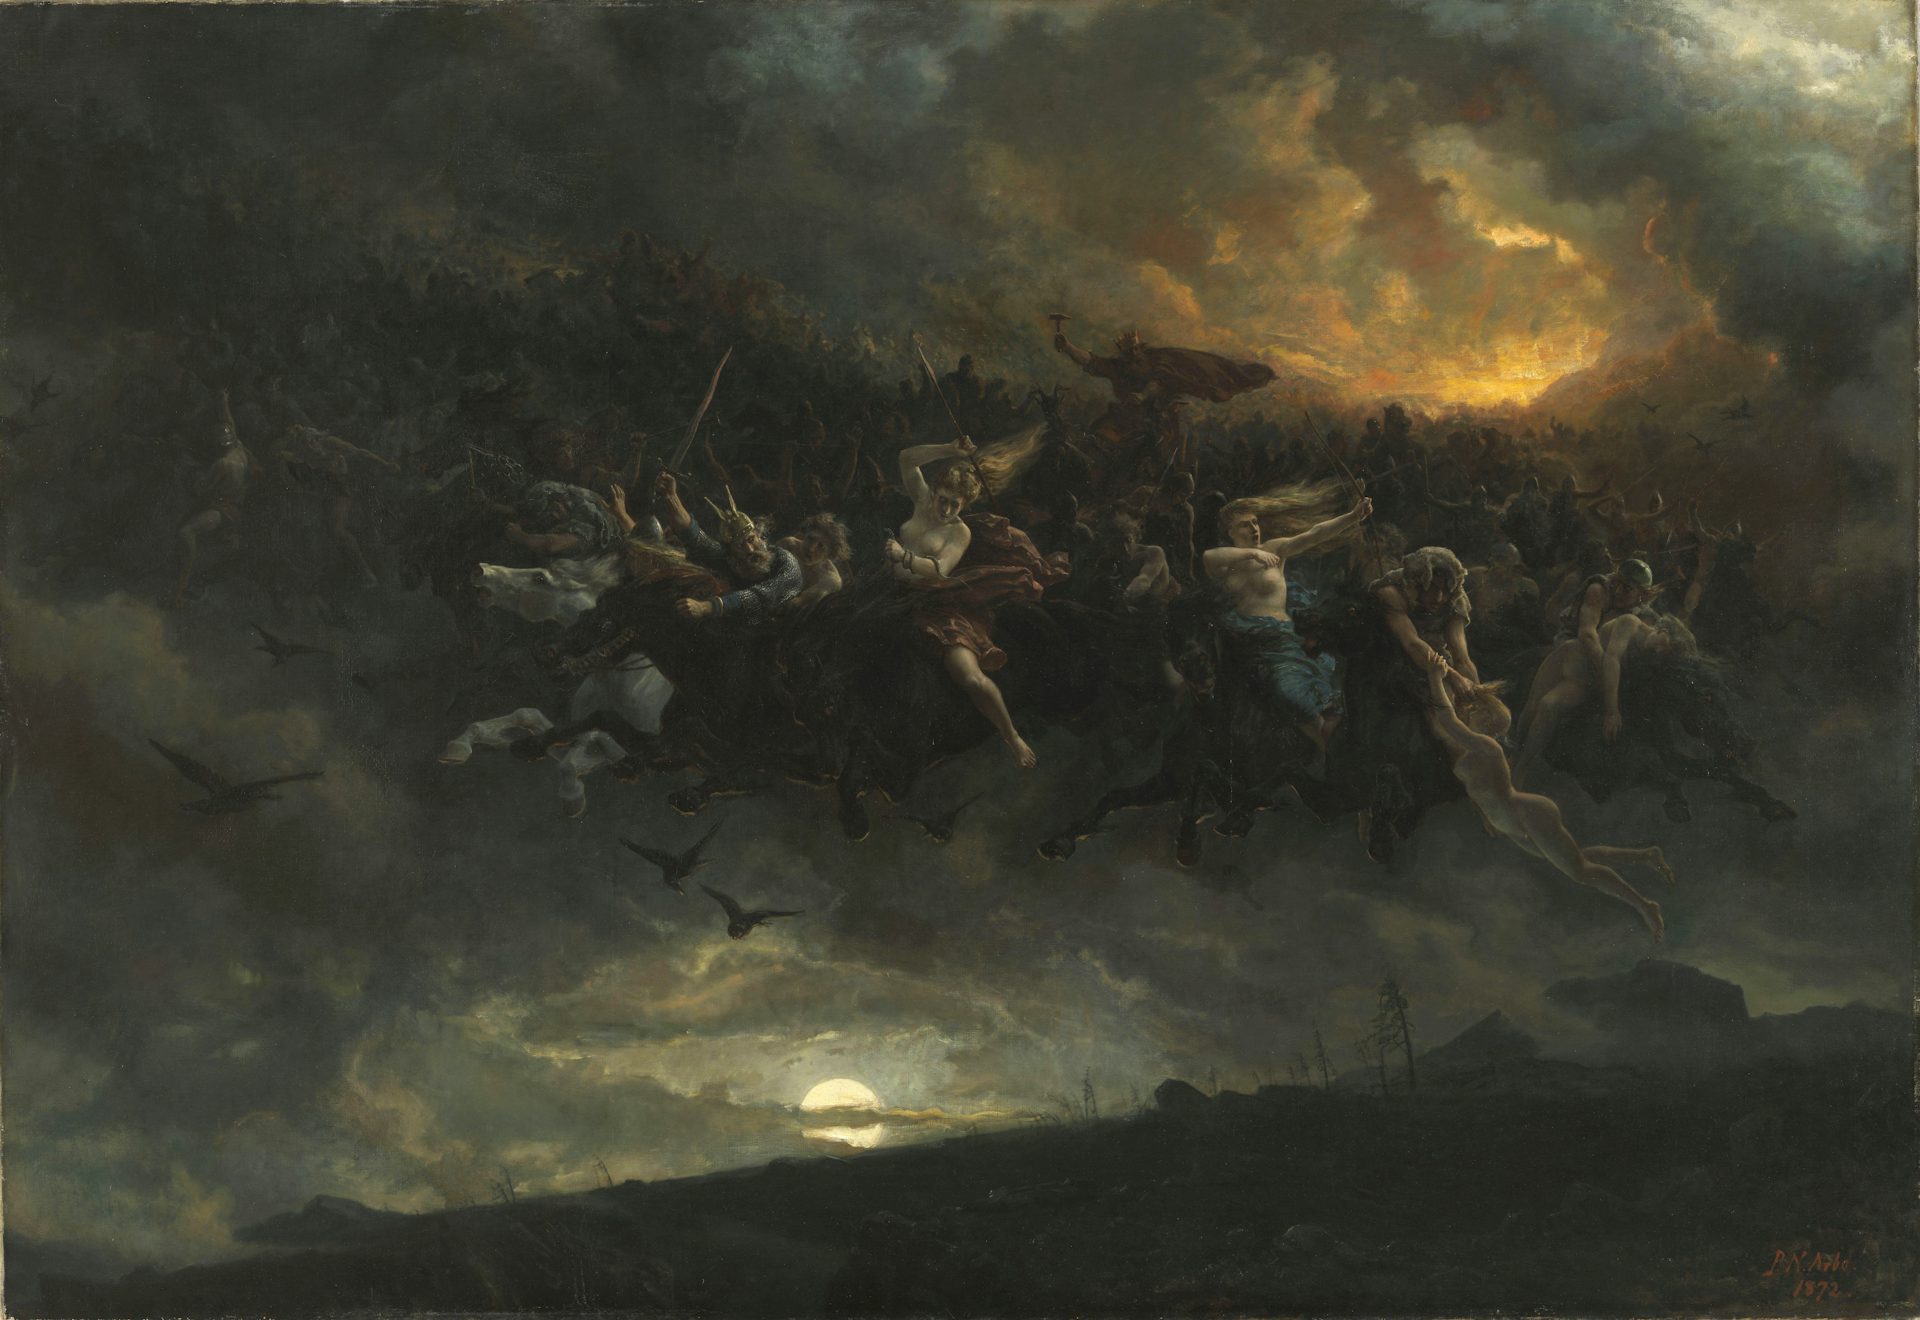 The Wild Hunt of Odin by Peter Nicolai Arbo (1872)